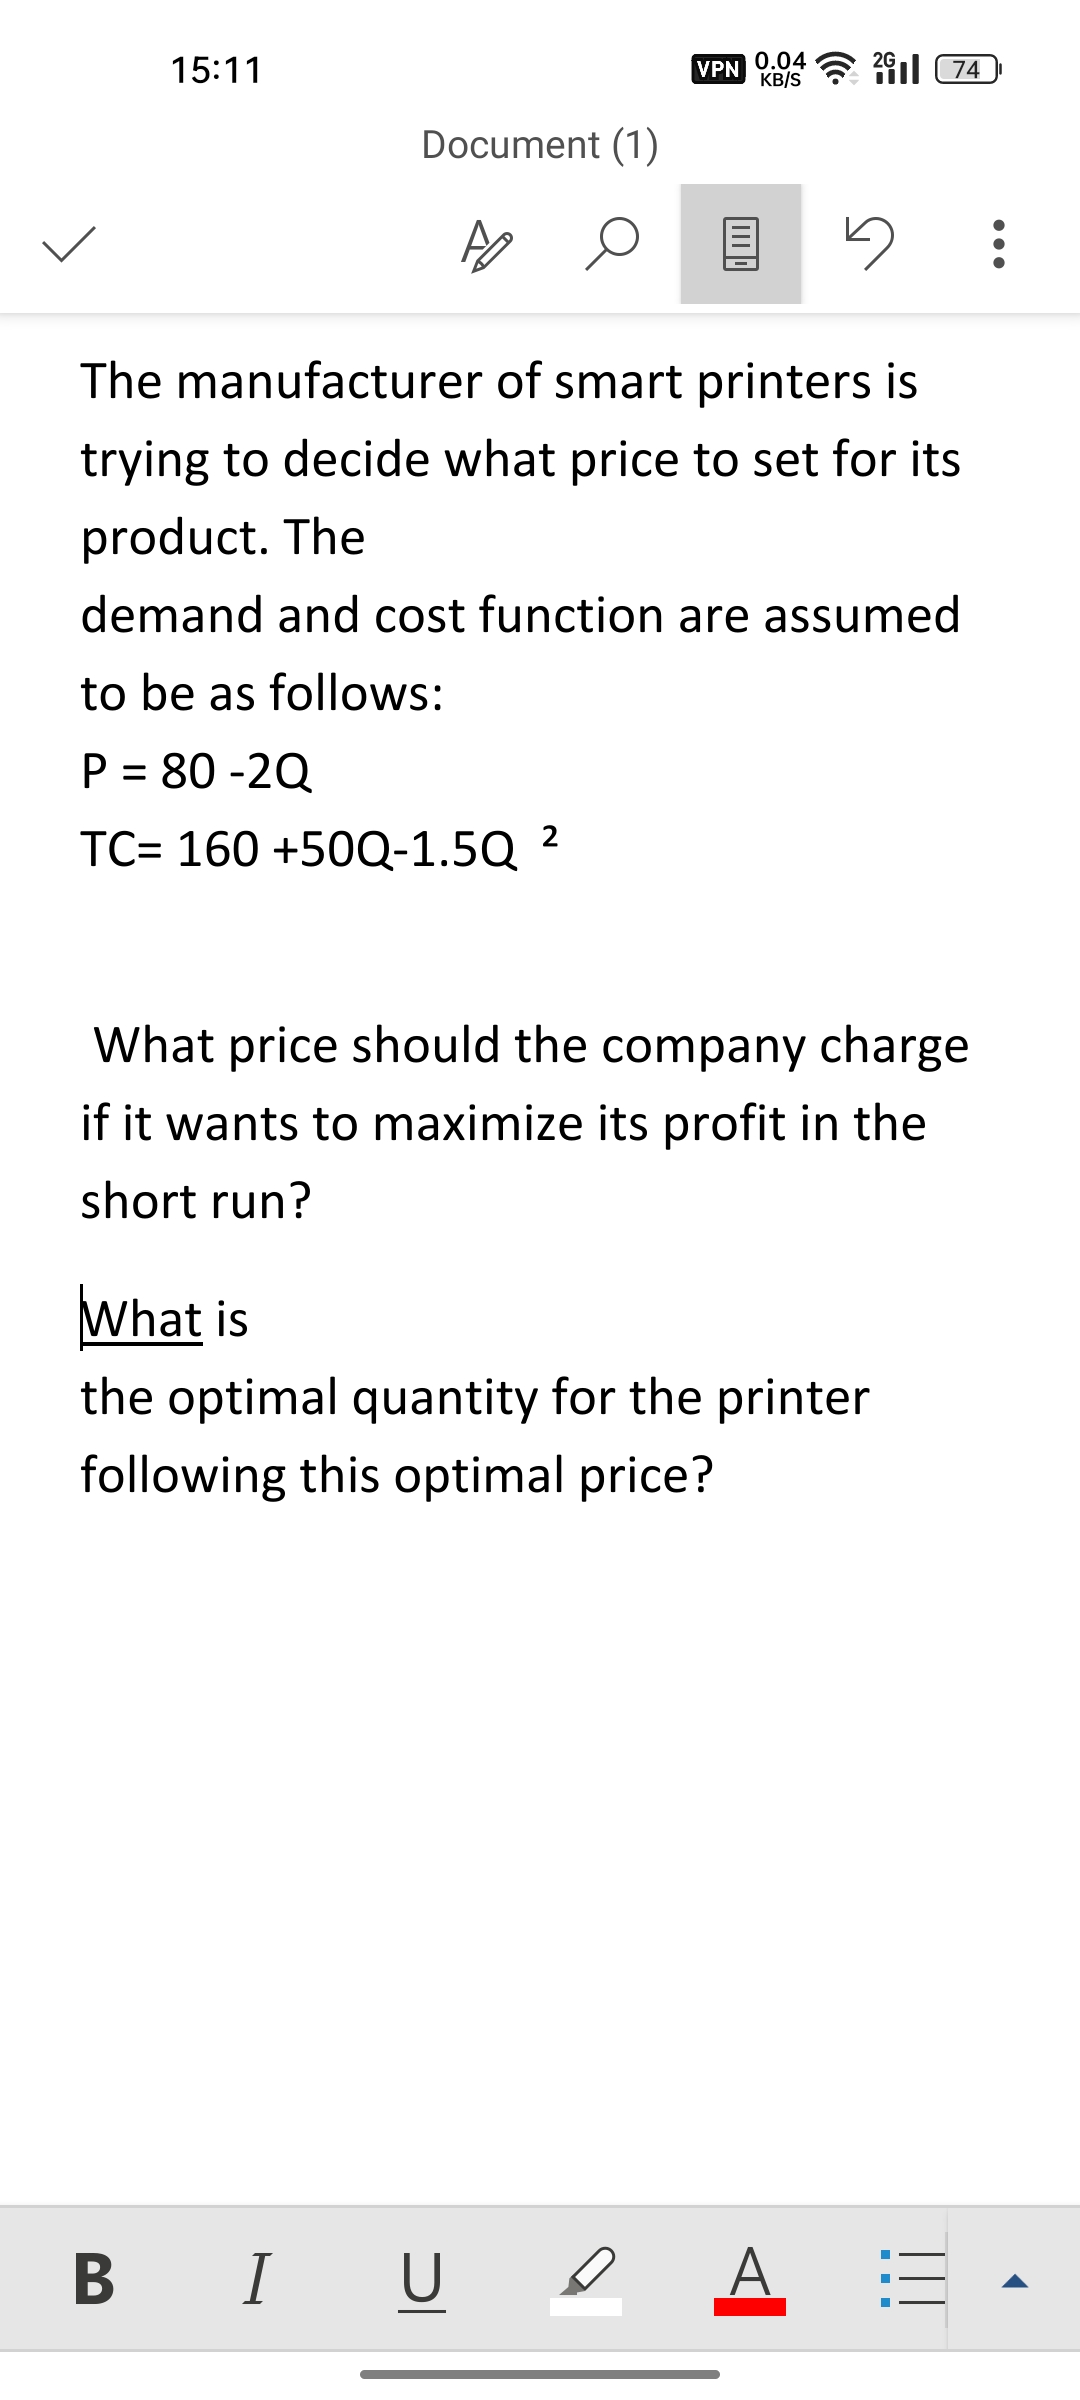 15:11
Document (1)
0
VPN
0.04
KB/S
274
5
The manufacturer of smart printers is
trying to decide what price to set for its
product. The
demand and cost function are assumed
to be as follows:
P = 80-2Q
TC= 160 +50Q-1.5Q 2
What price should the company charge
if it wants to maximize its profit in the
short run?
BI U ο A
What is
the optimal quantity for the printer
following this optimal price?
1:3
- - -
: